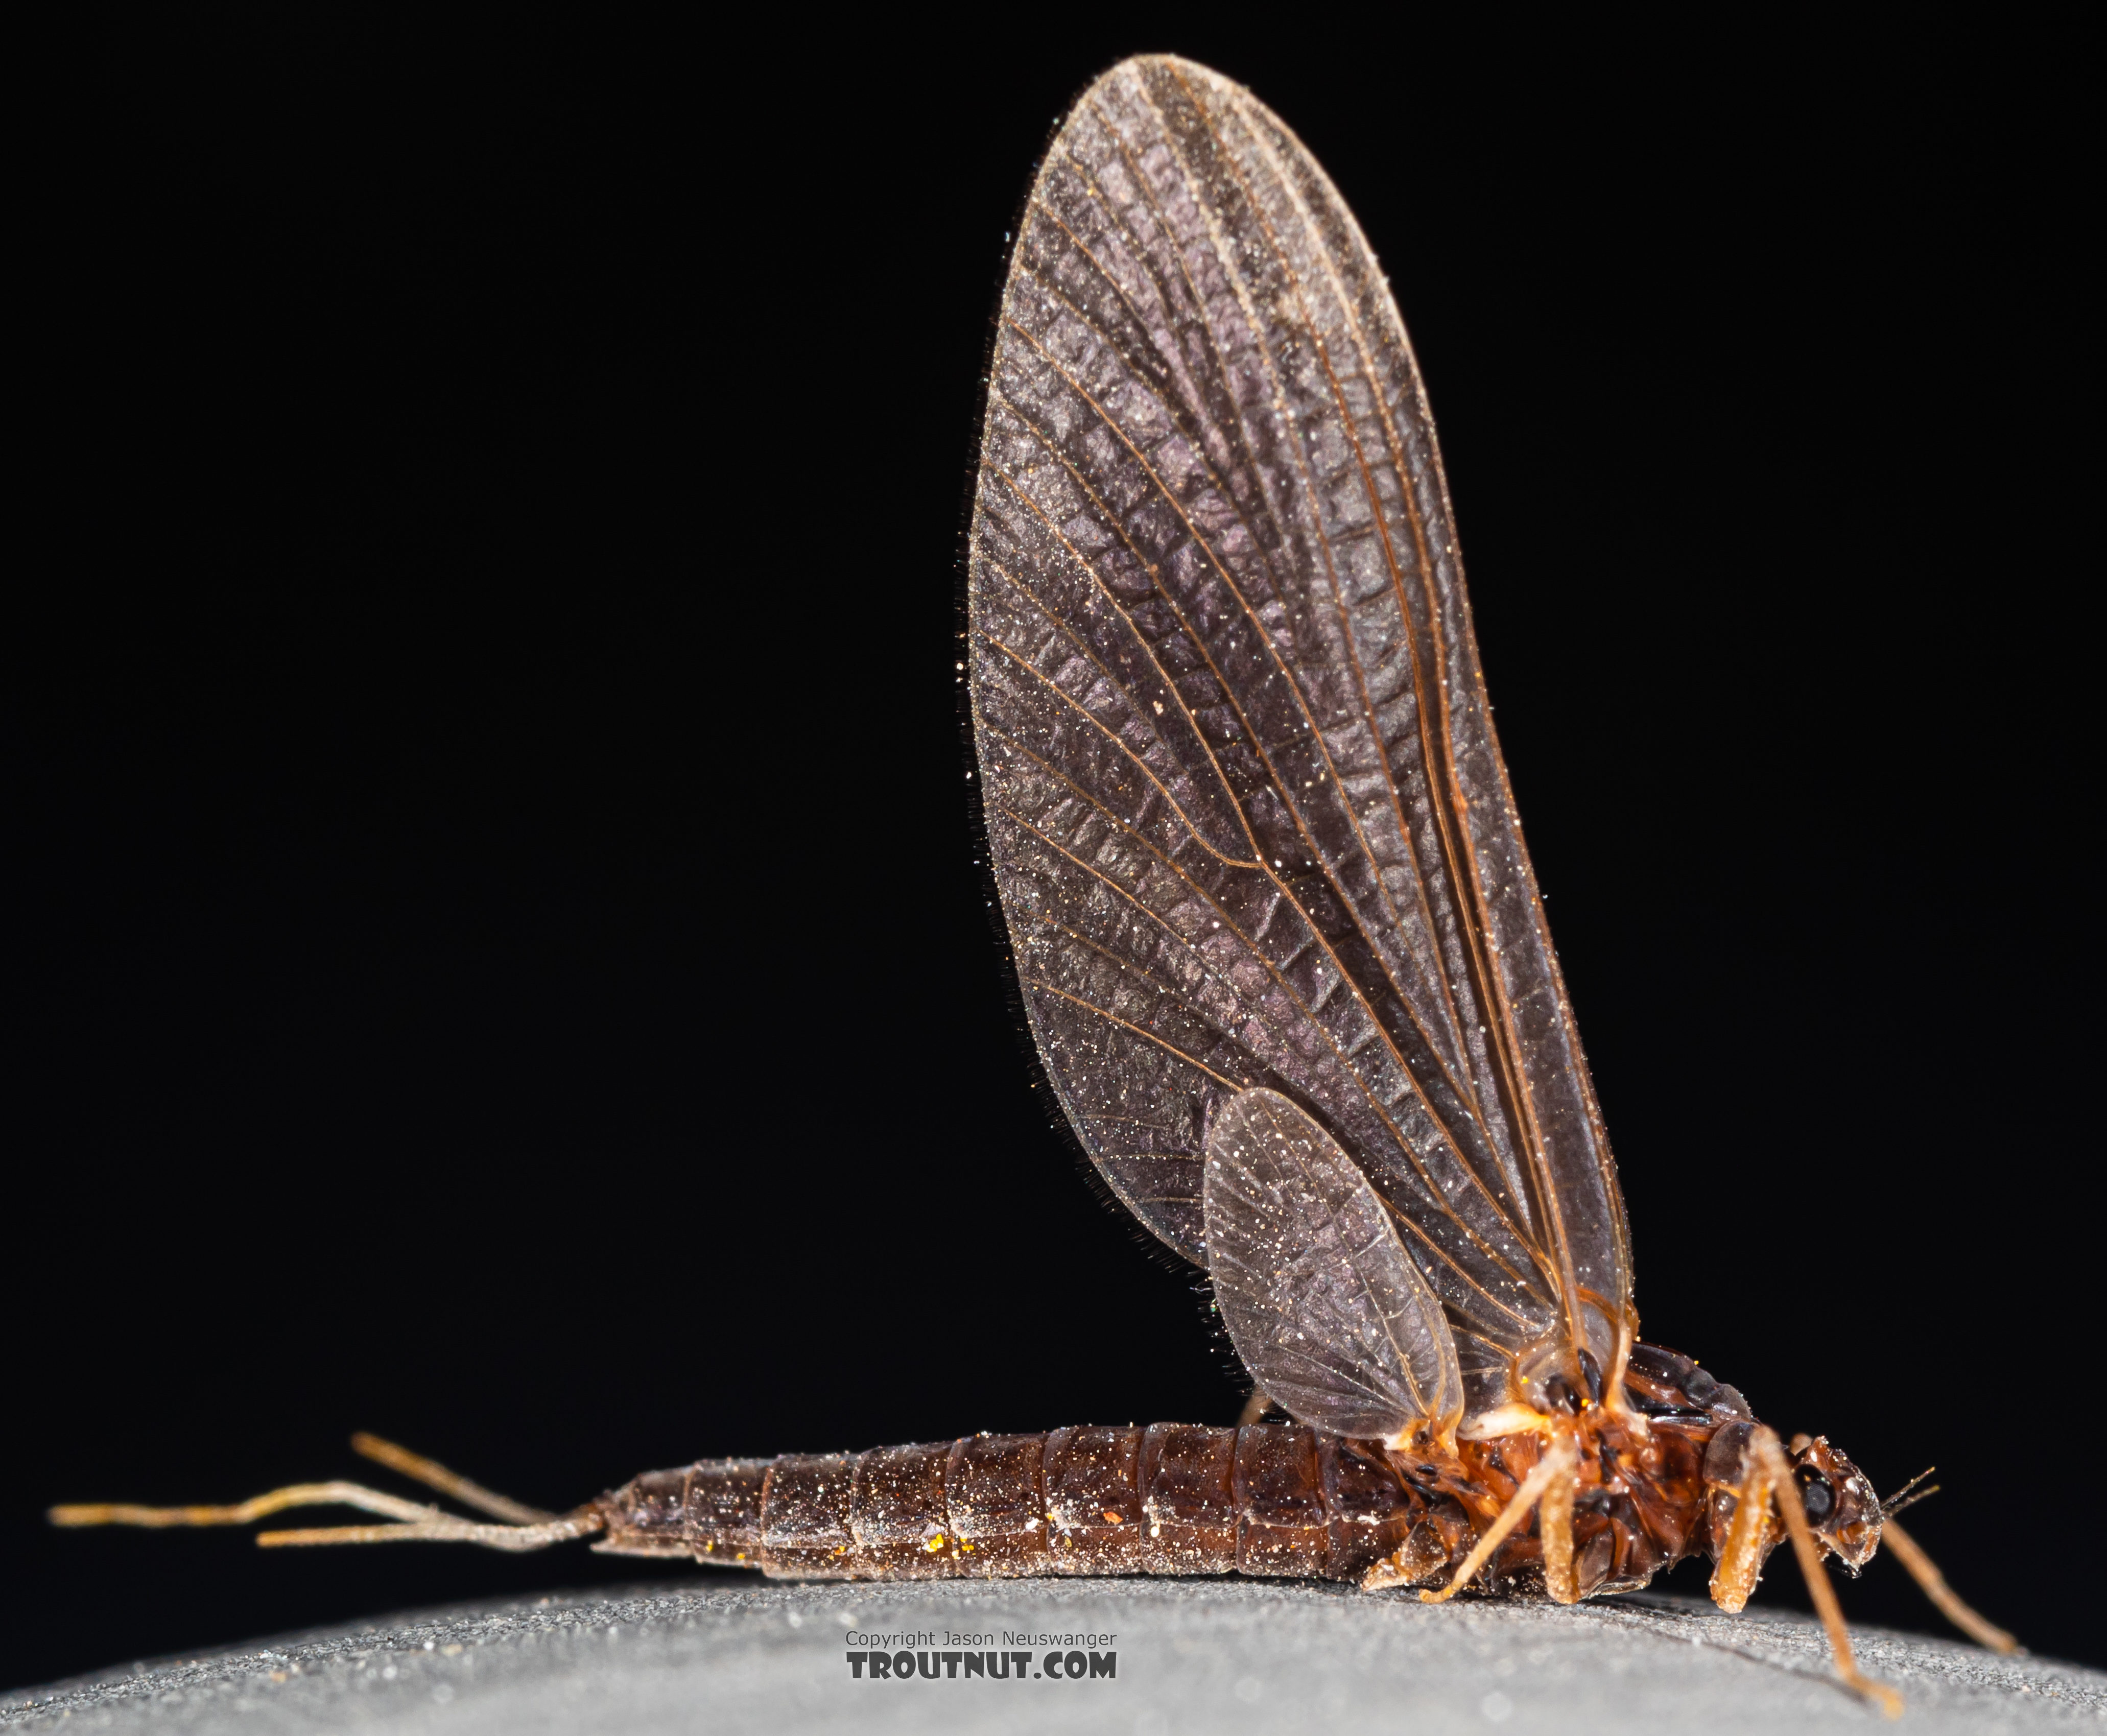 Female Paraleptophlebia (Blue Quills and Mahogany Duns) Mayfly Dun from Mystery Creek #250 in Washington